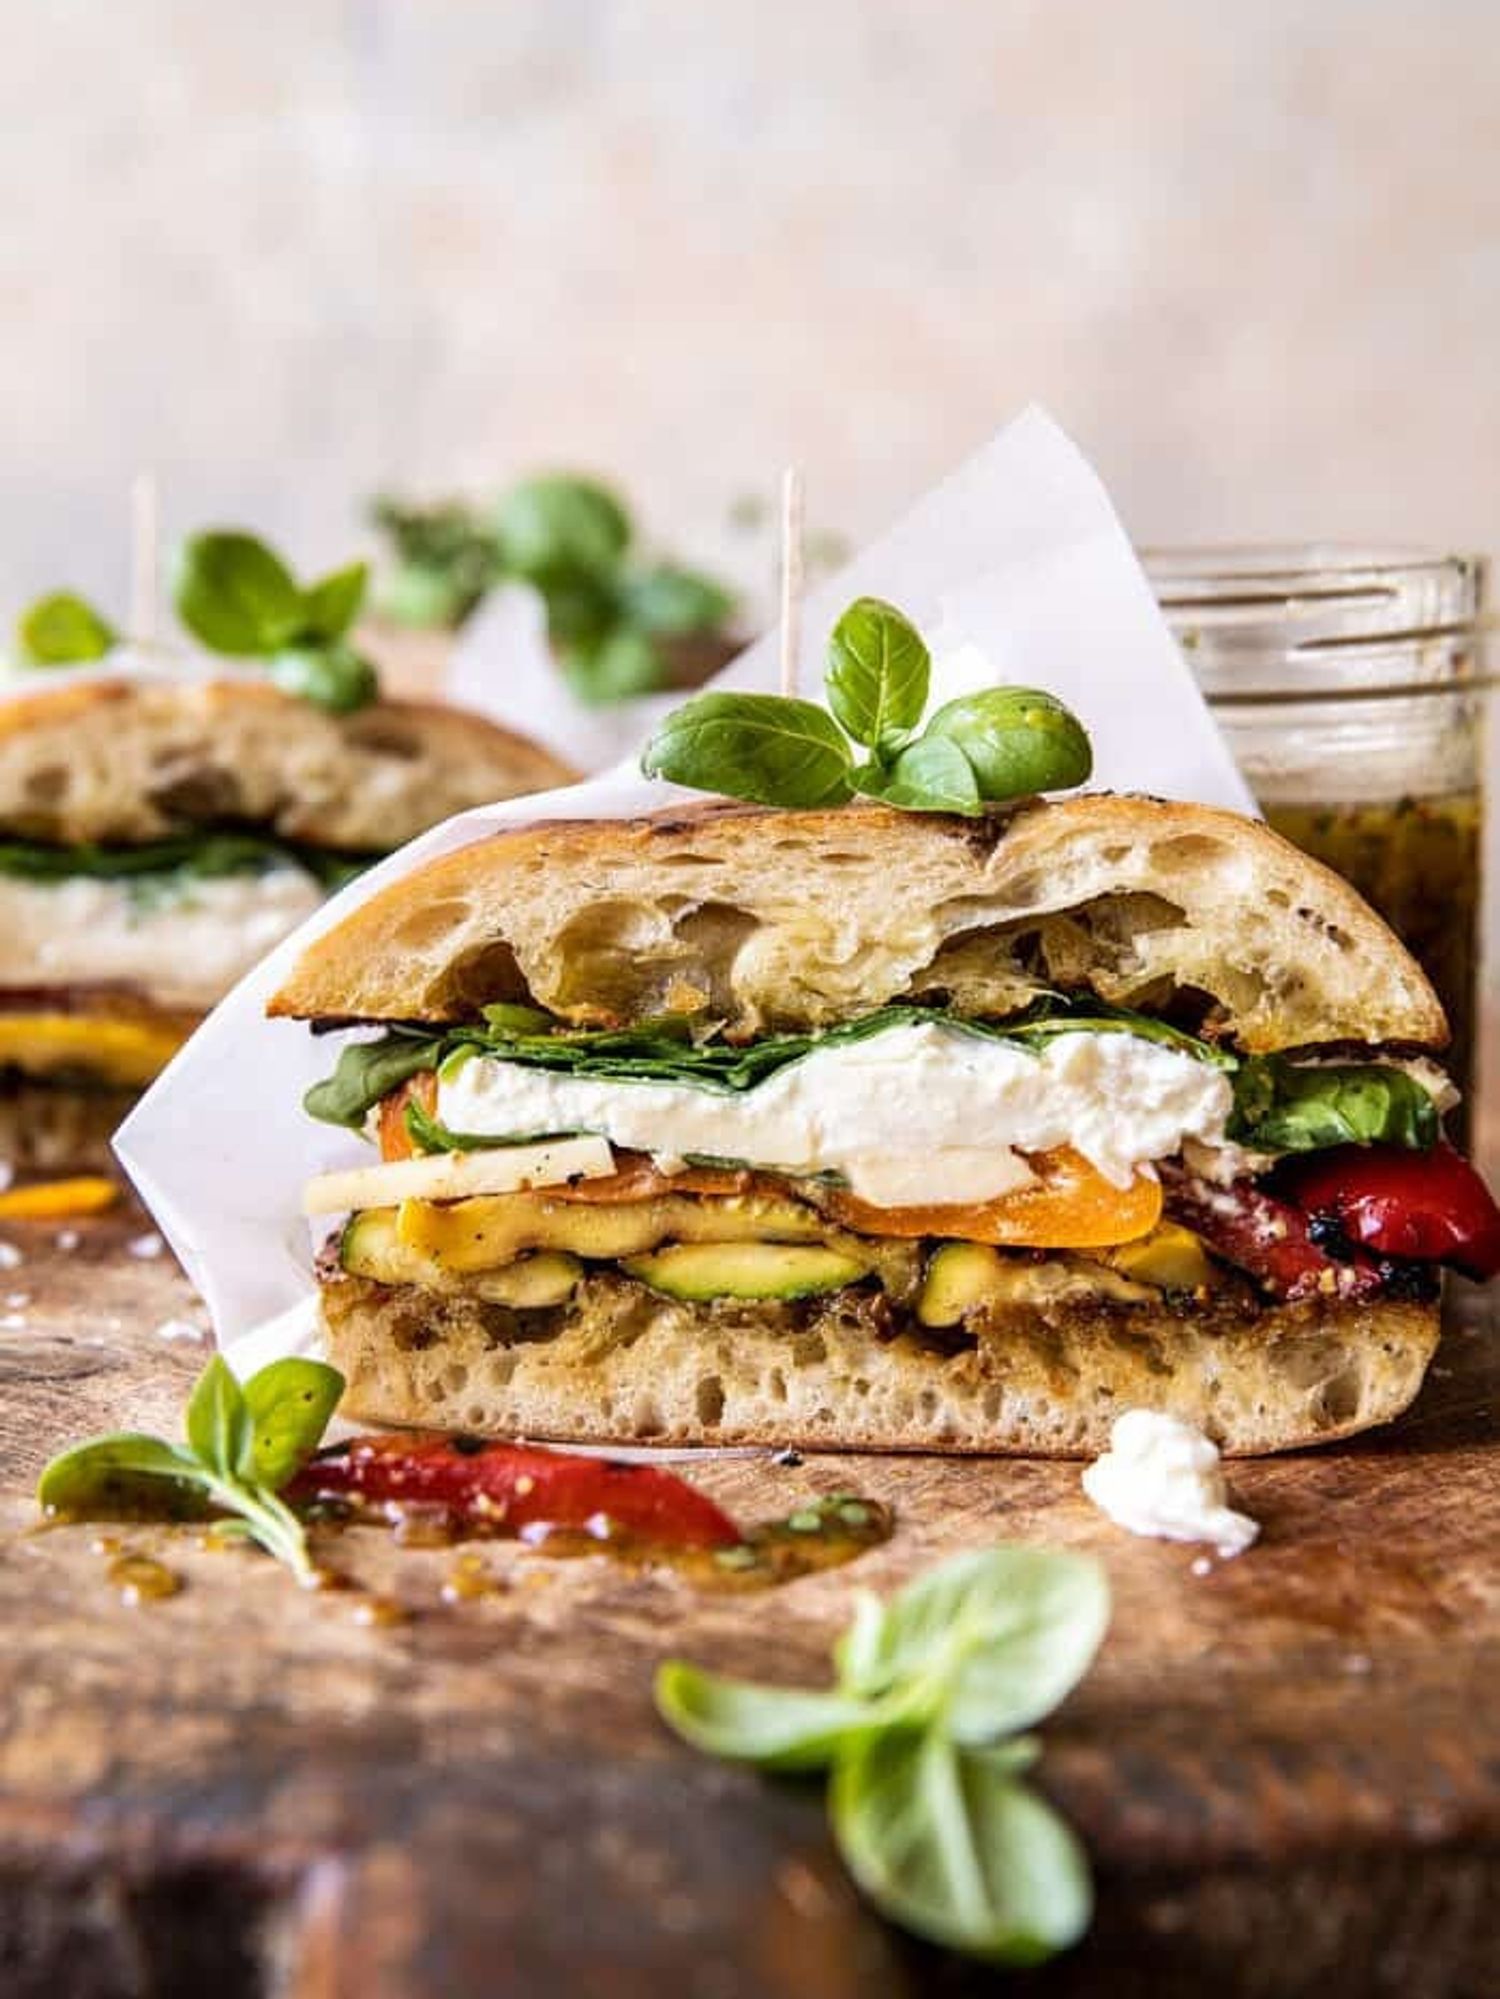 easy vegetable recipes grilled veggie burrata sandwich with lemon thyme and honey mustard